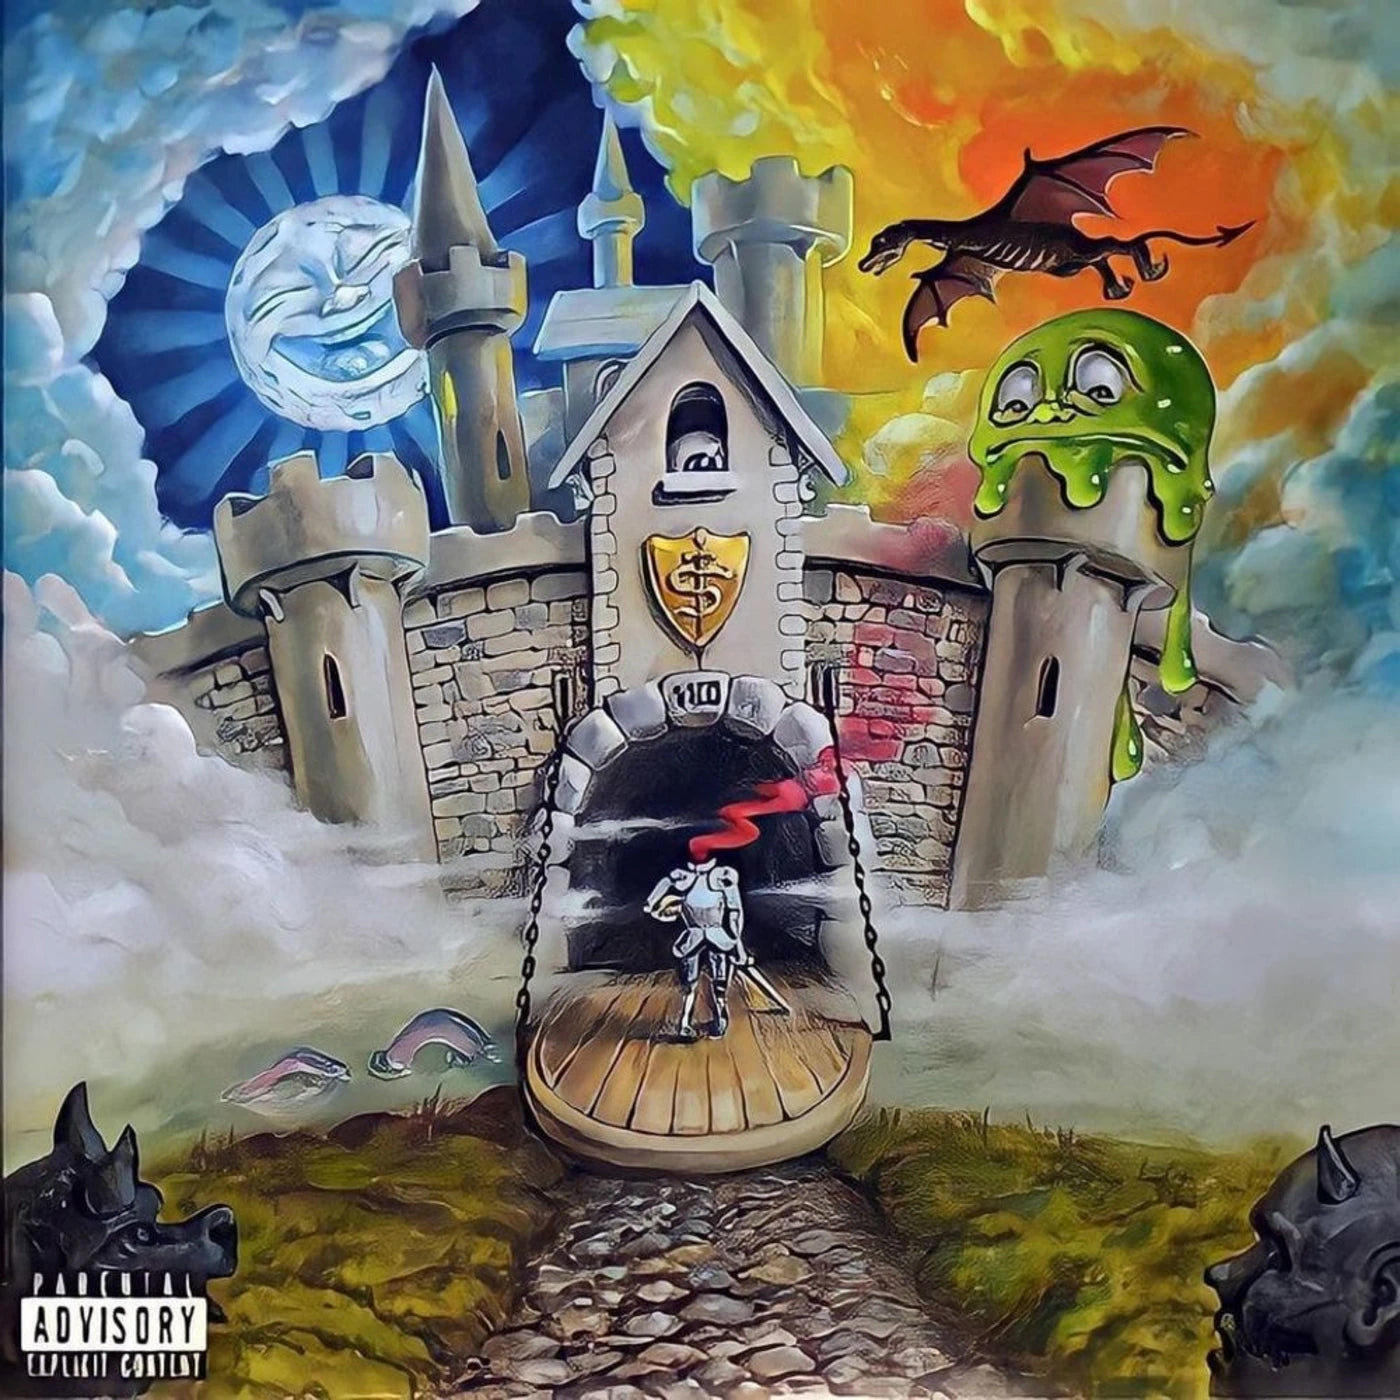 Trippie Redd (Holy Smokes Featuring Lil Uzi Vert) Album Cover - Lost Posters